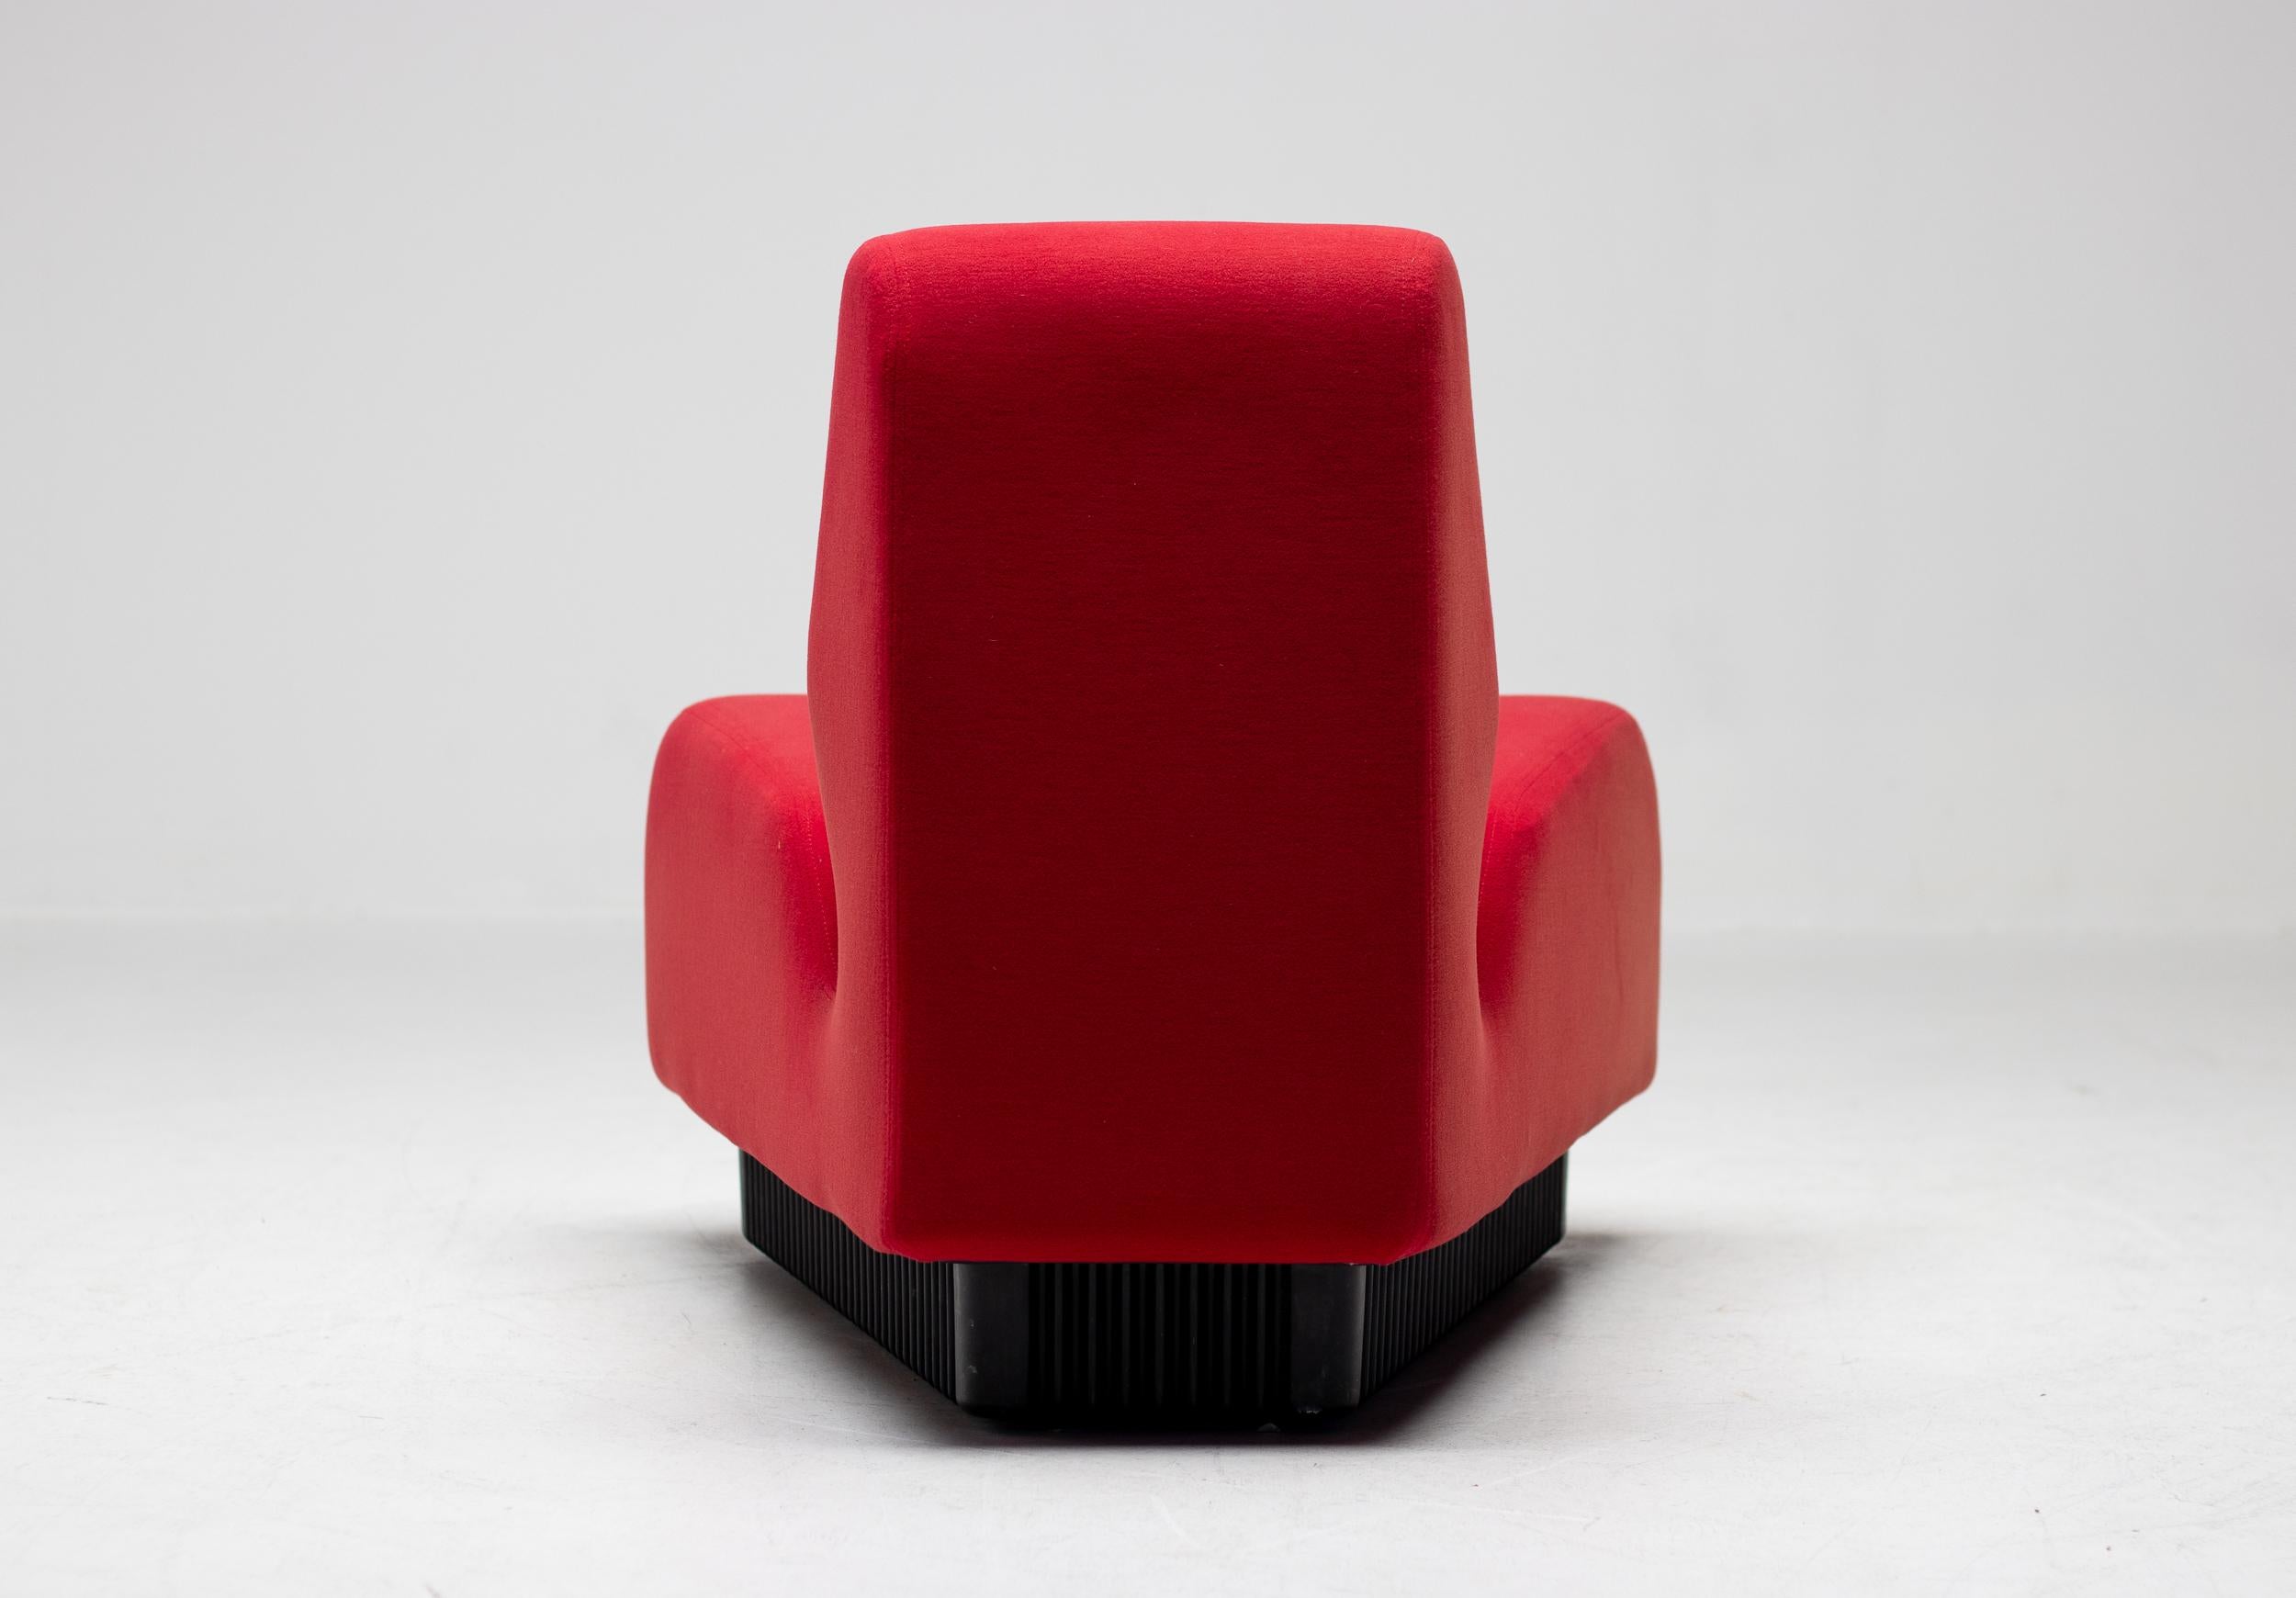 A single modular Don Chadwick seating piece set in a red fabric with black ABS plastic base. This pie shaped seating piece is covered in a contract fabric that is soft and able to stretch a bit to conform to the shape. Manufactured by the Herman